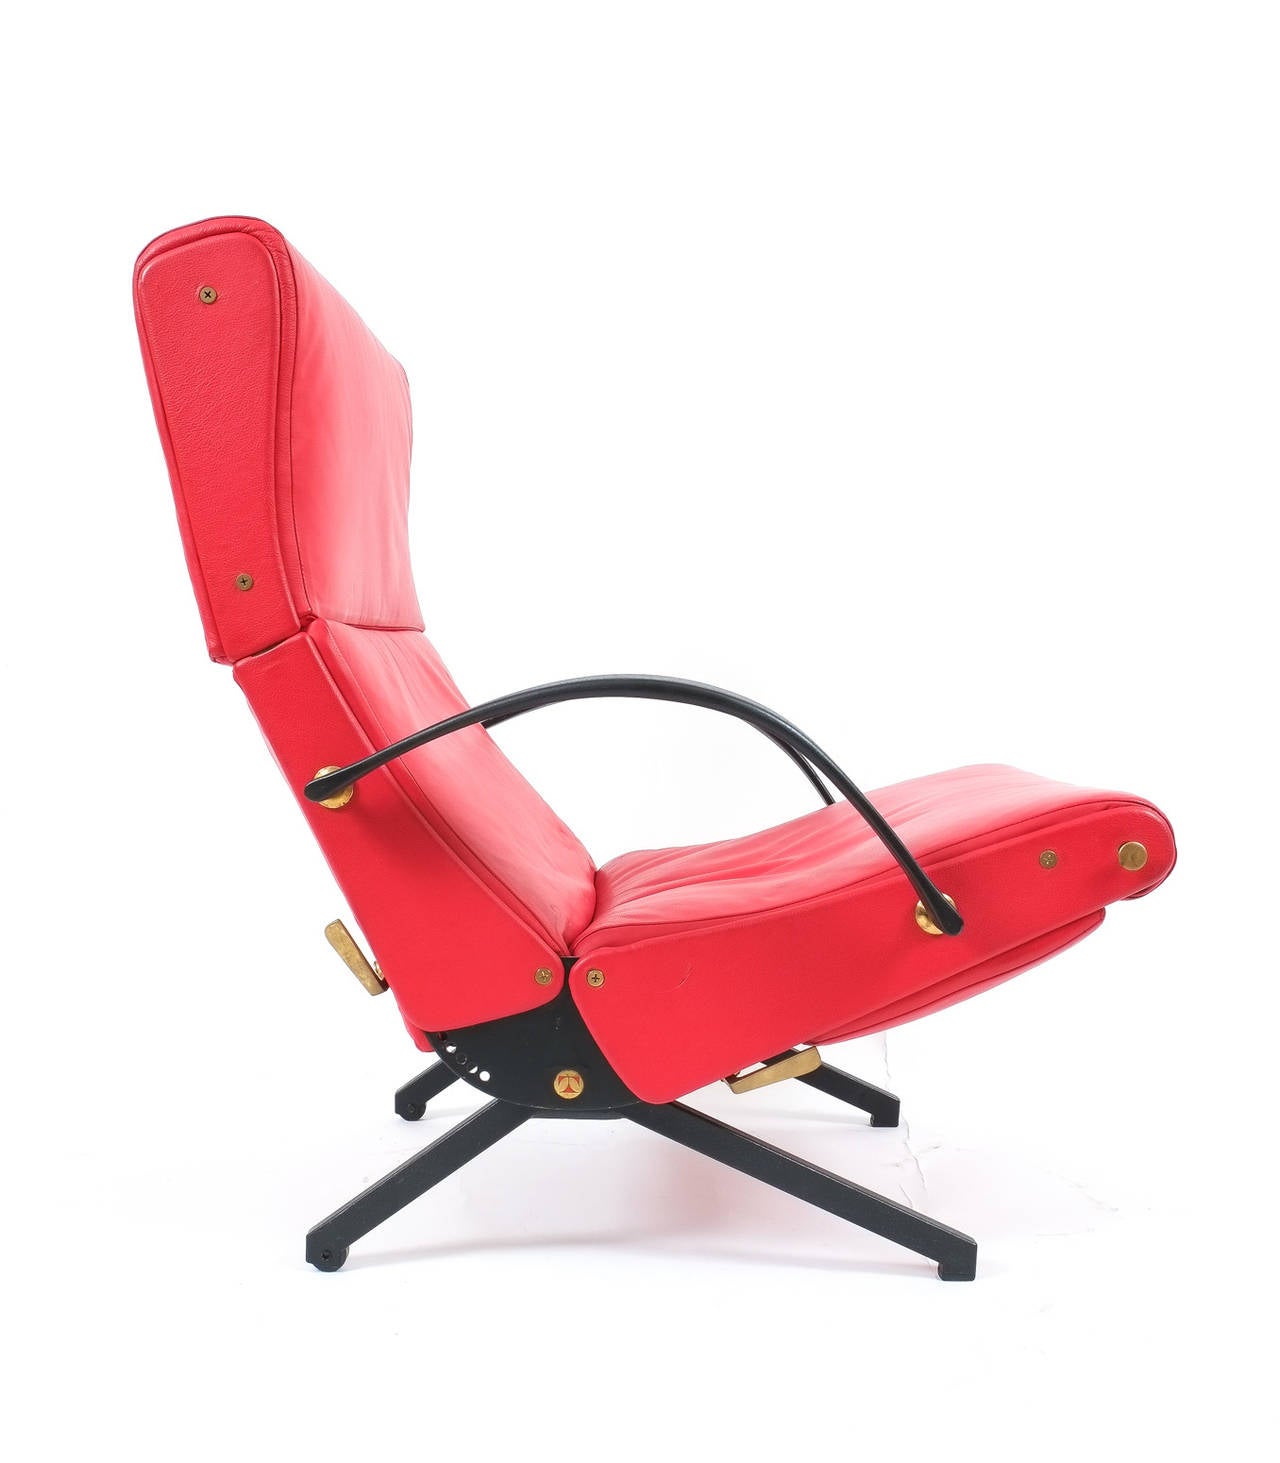 Osvaldo Borsani P40 Relaxing System Leather Armchair, Tecta 1950 Italy. Beautiful Osvaldo Borsani P40 Chaiselongue by Tecta, Italy upholstered in thick red leather with brass details and original rubber armrests. The condition and functions are very